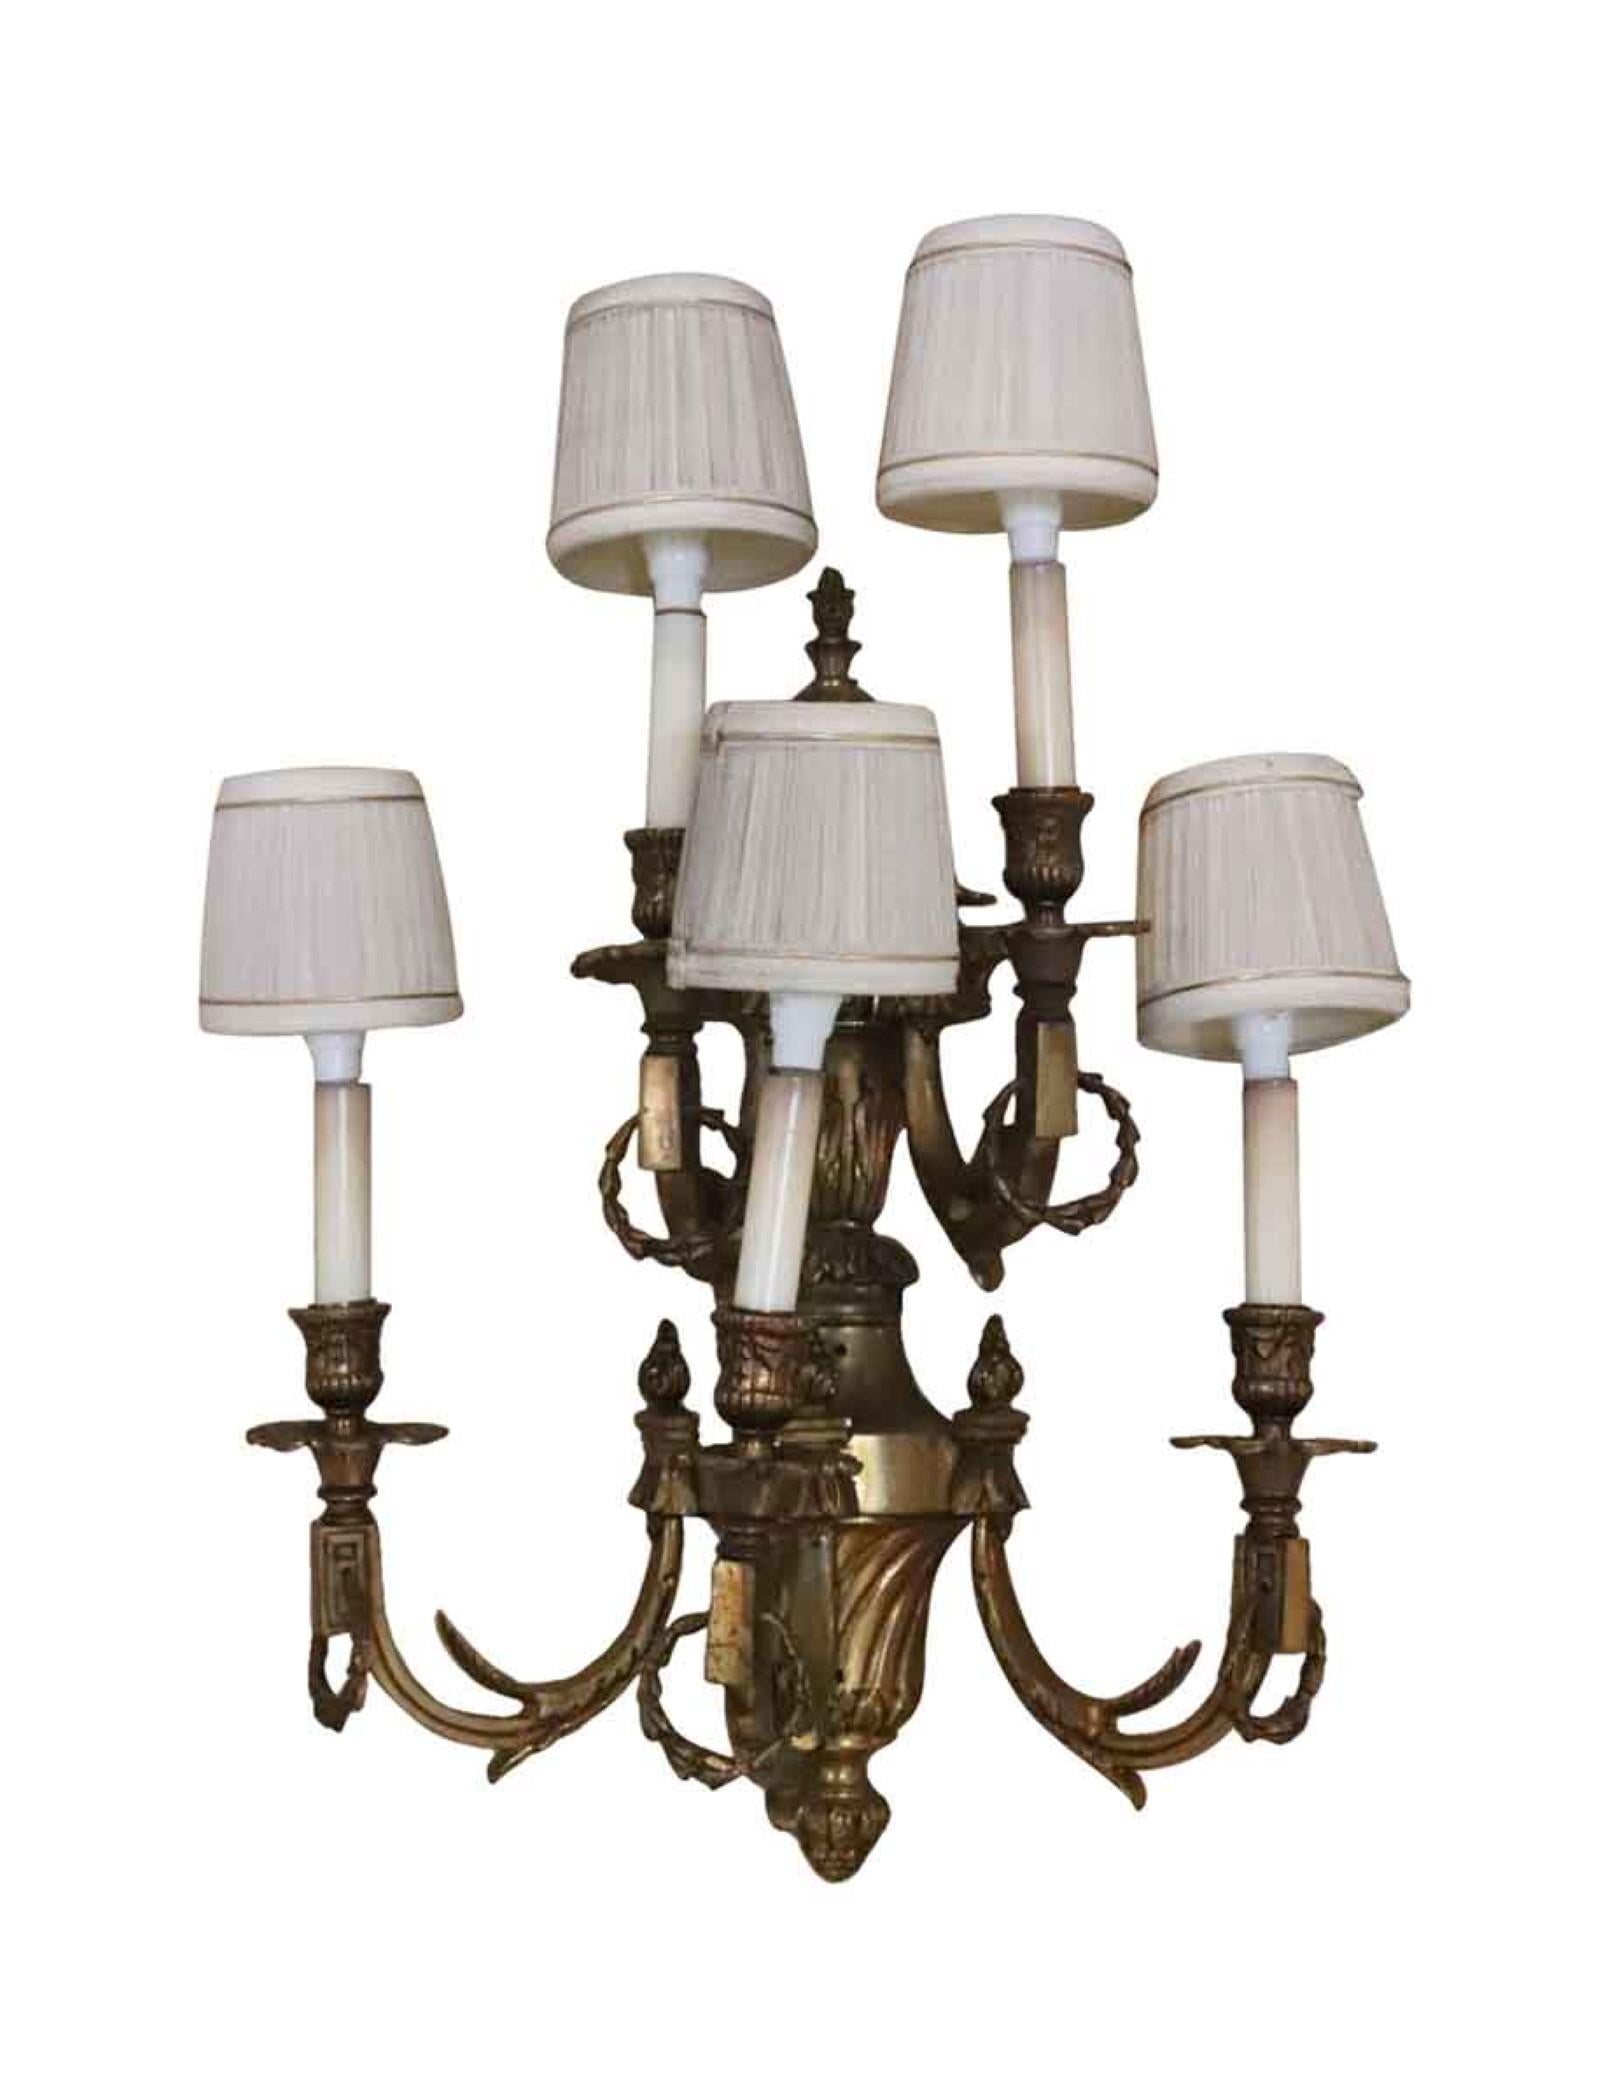 Heavy cast decorative bronze five light sconces with shades from The Conrad Suite side room in the Waldorf Astoria. These are vintage 1980s. Price includes restoration. Waldorf Astoria authenticity card included with your purchase. Cleaned and